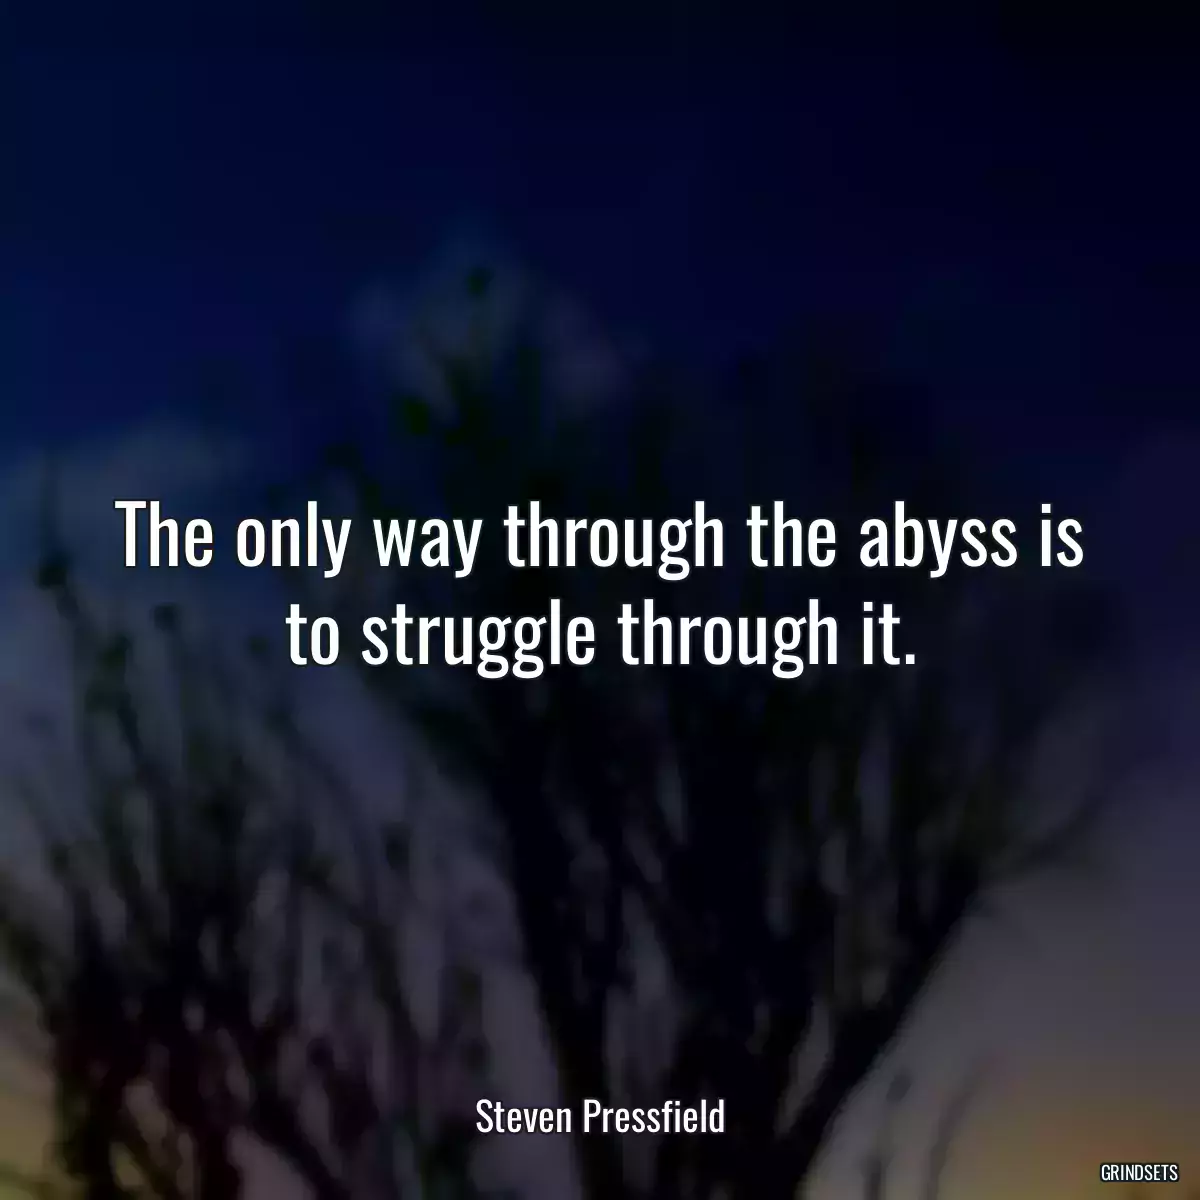 The only way through the abyss is to struggle through it.